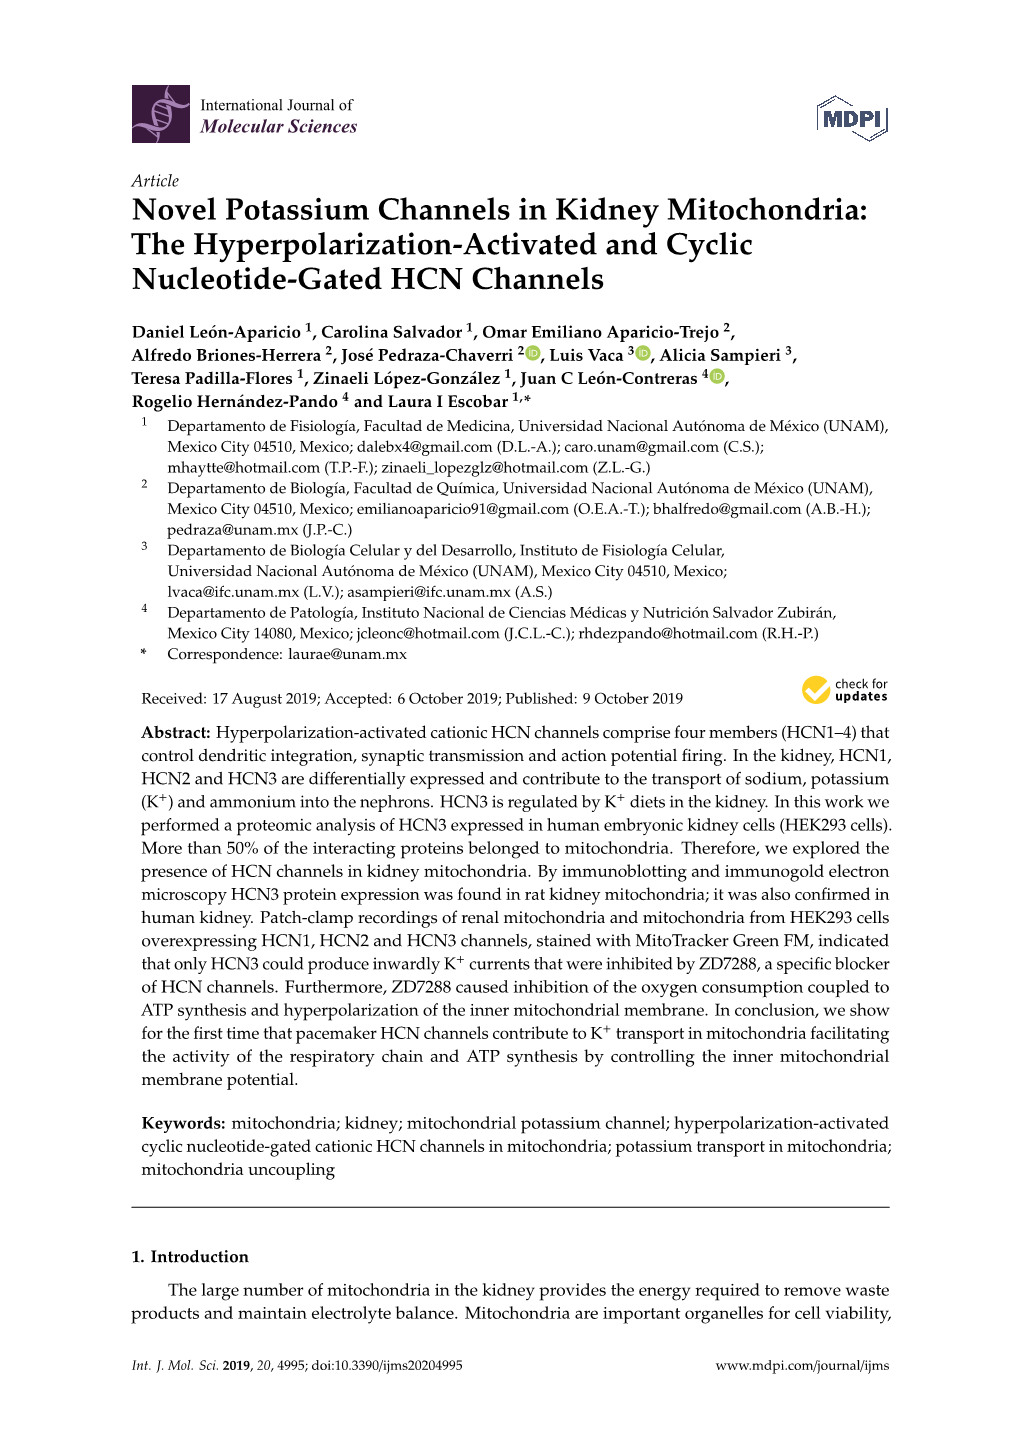 Novel Potassium Channels in Kidney Mitochondria: the Hyperpolarization-Activated and Cyclic Nucleotide-Gated HCN Channels